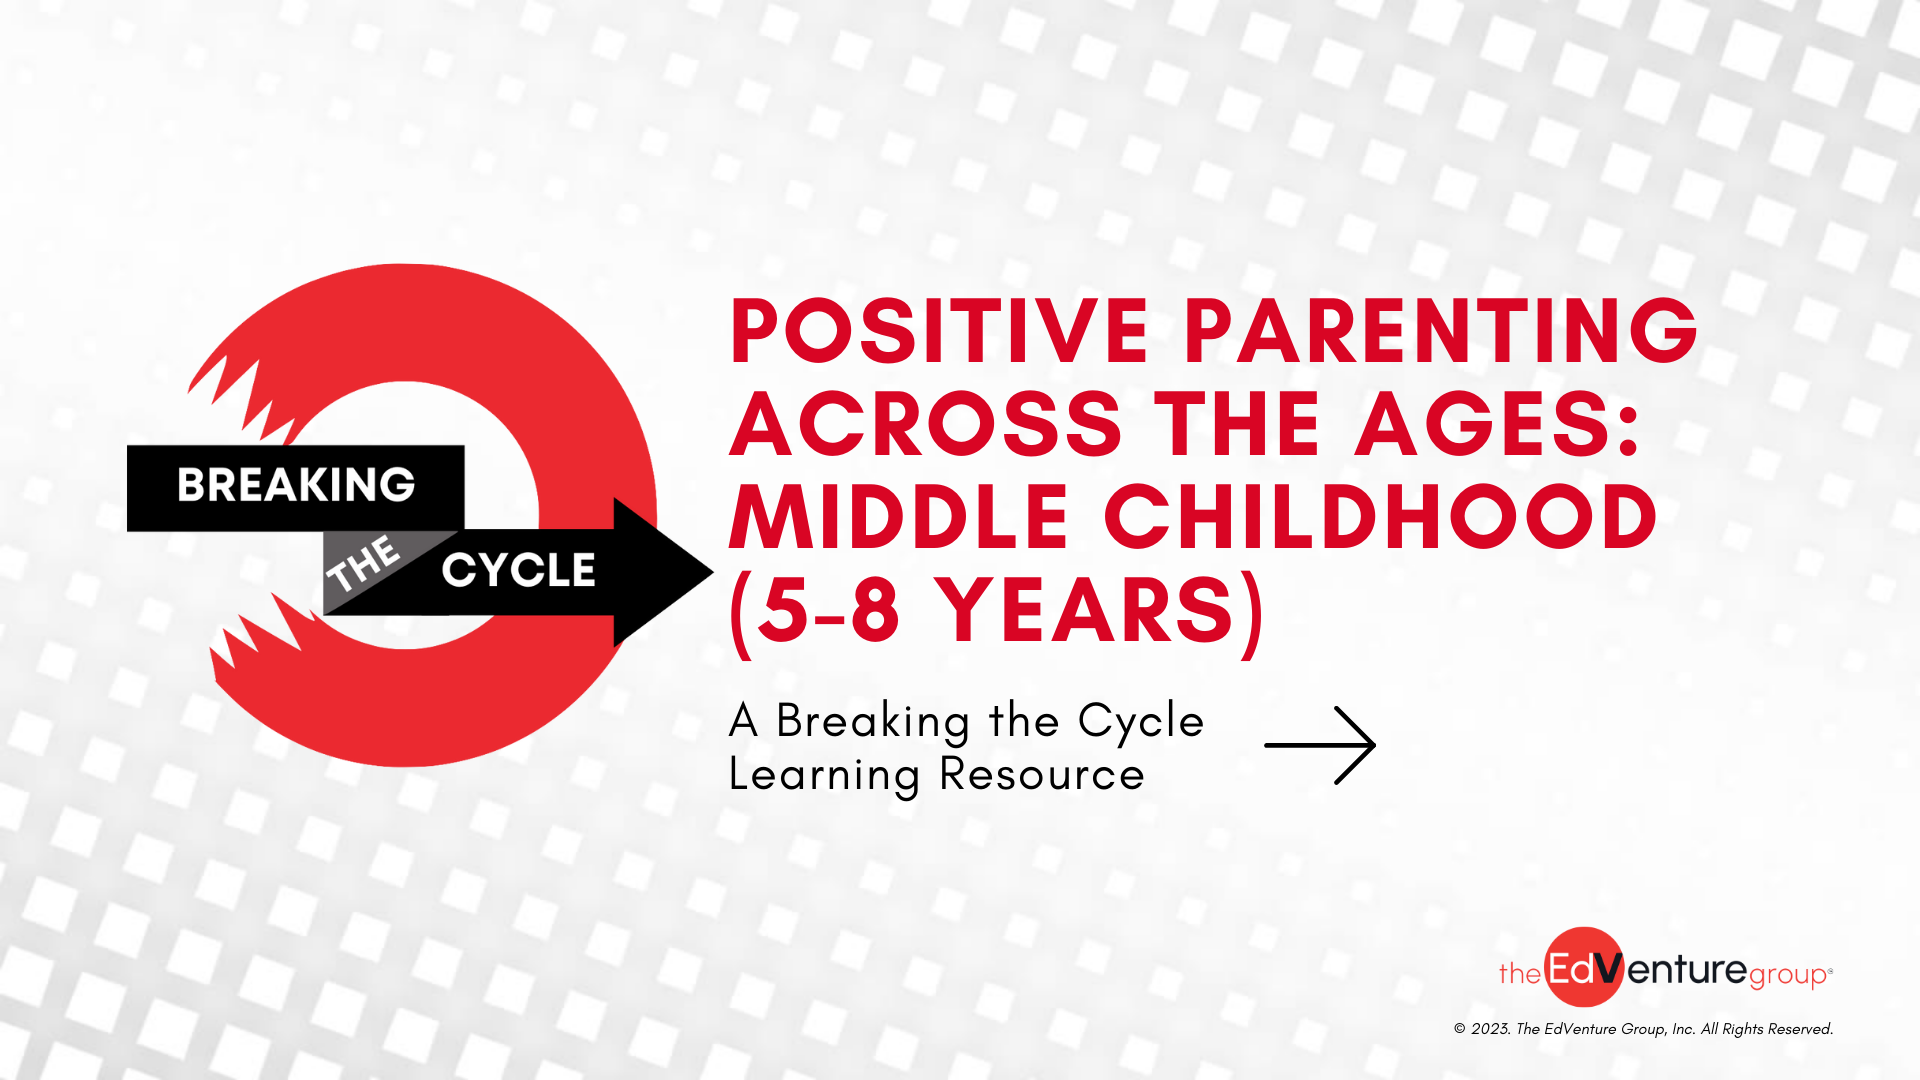 Middle Childhood (5-8 years) Positive Parenting Across the Ages